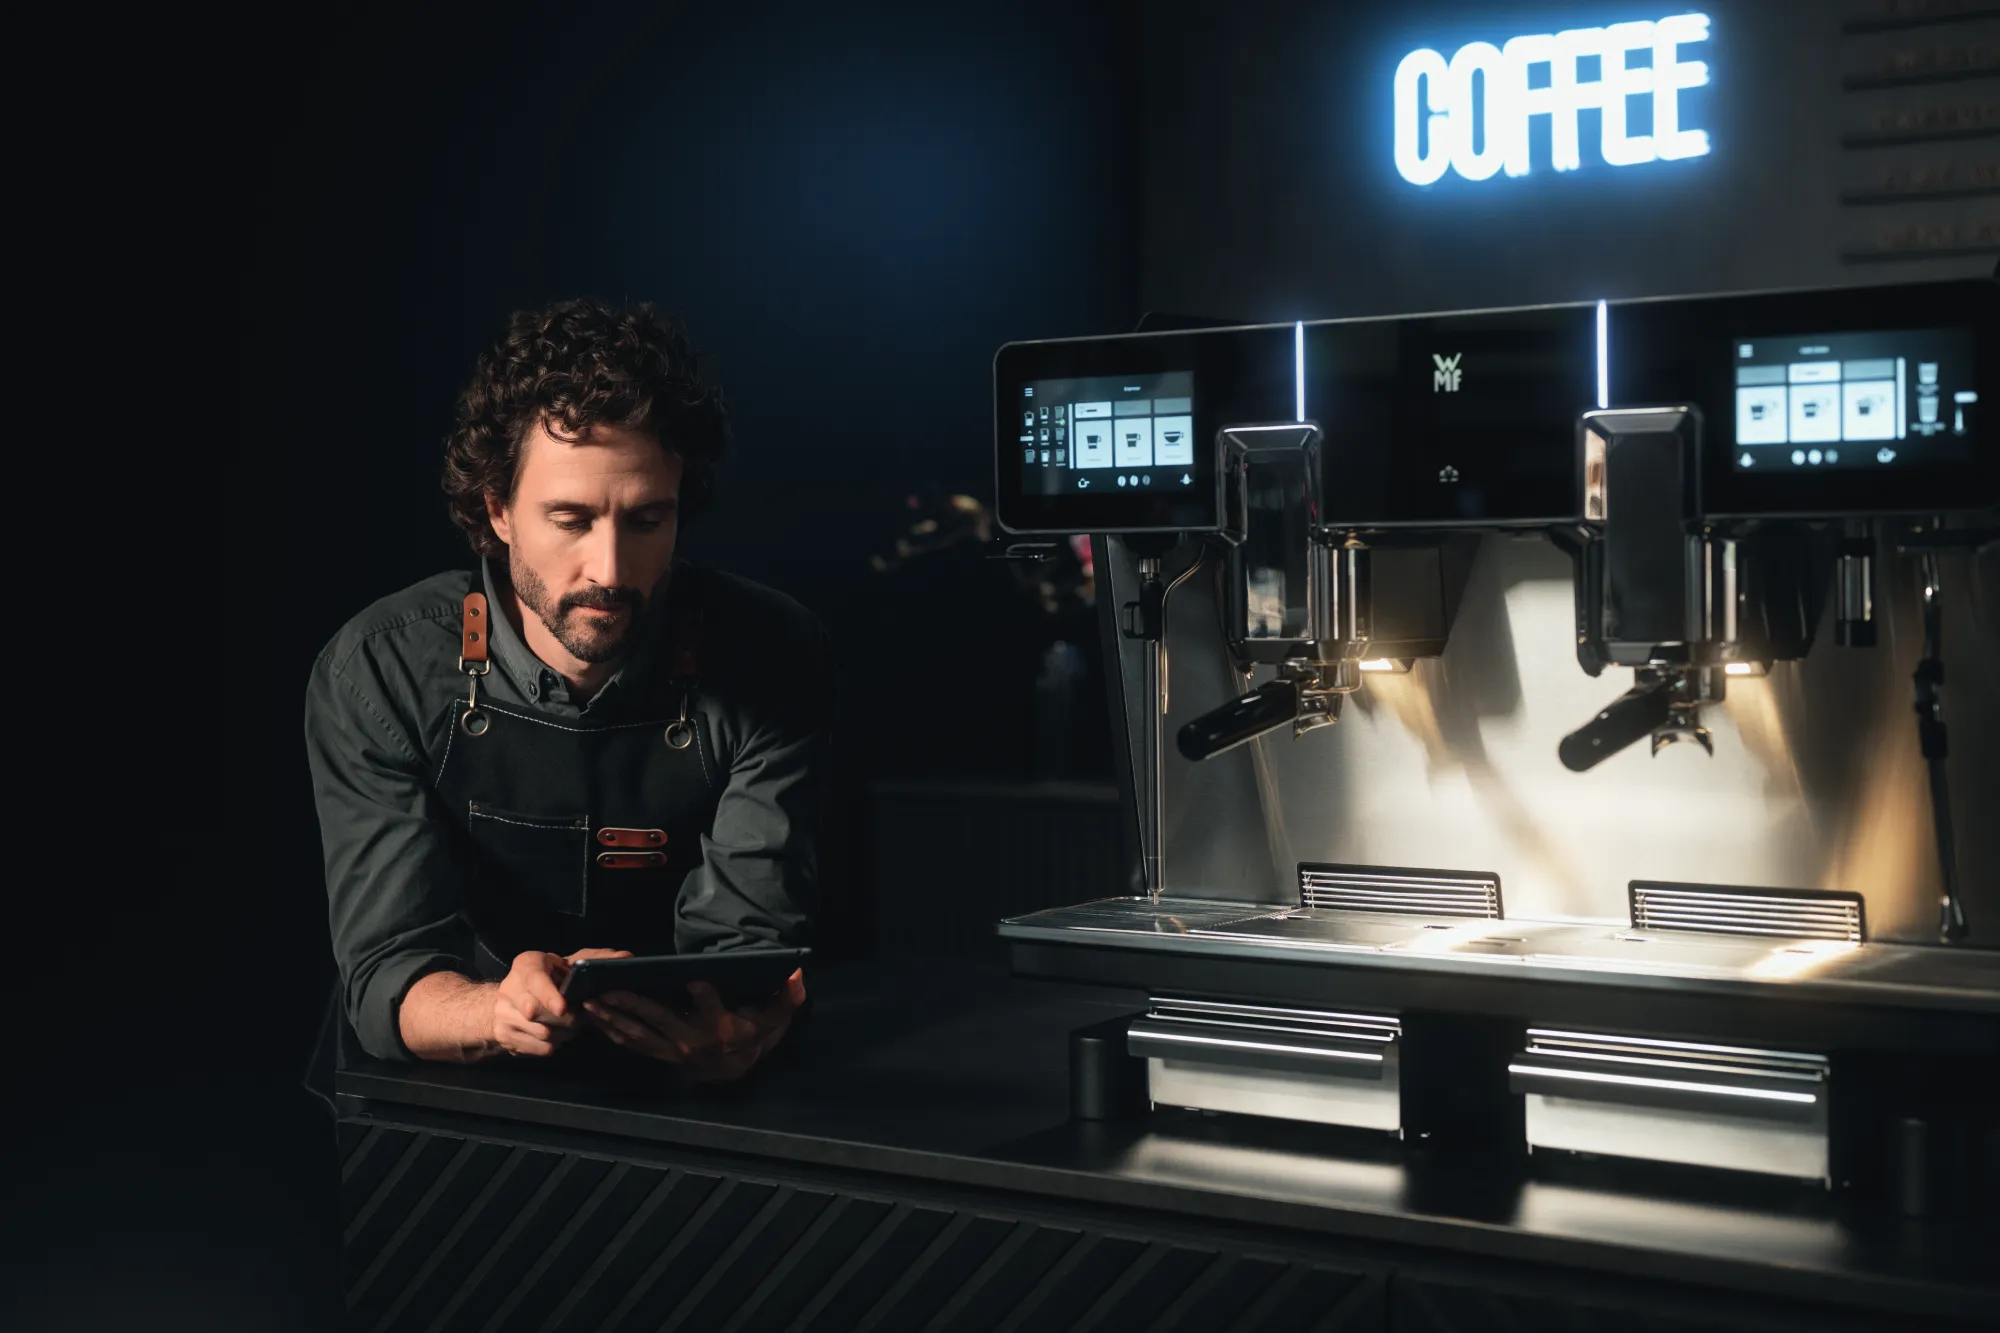 Focused barista in black apron using tablet next to a WMF espresso NEXT professional coffee machine, under neon 'COFFEE' sign, in a dark café setting.